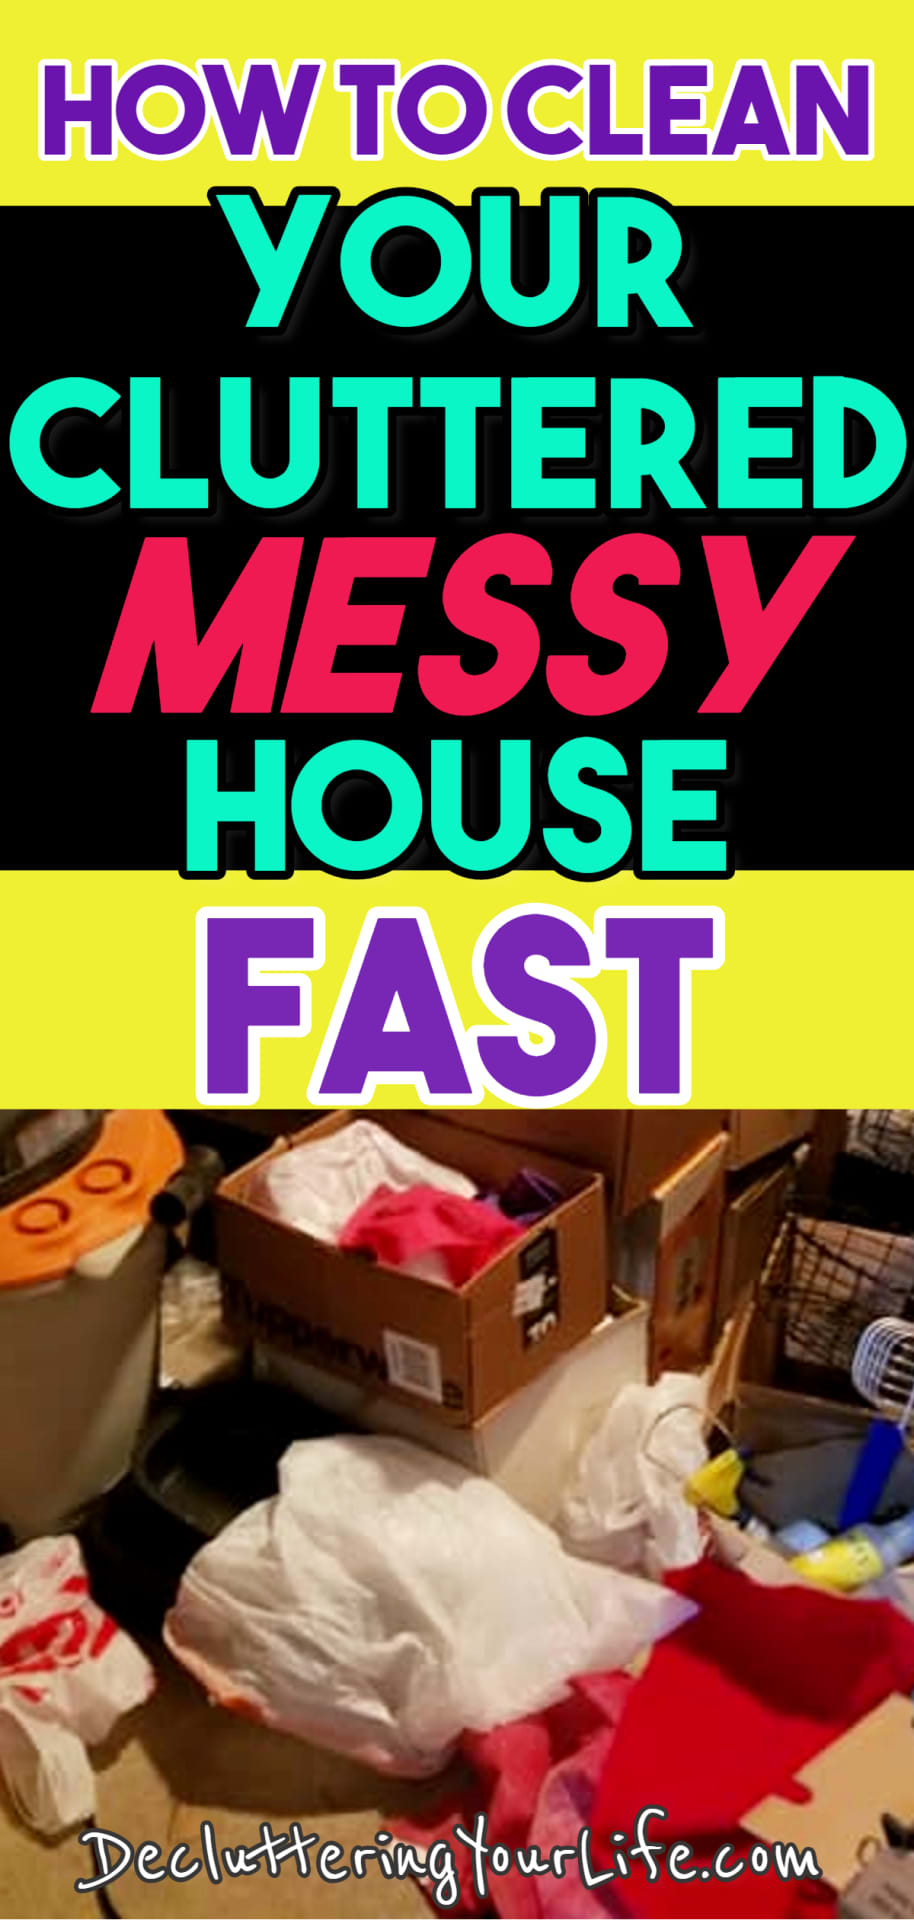 Uncluttering Your Home! How to clean a cluttered house FAST - go from cluttered mess to organized success with these cleaning hacks to declutter messy house - even if you want to organize your home on a budget.  Dejunking your home is easy with these dejunking tips, storage solutions and clutter organization hacks.  Fast and simple clutter control ideas made easy - free home organization printables and checklists too!